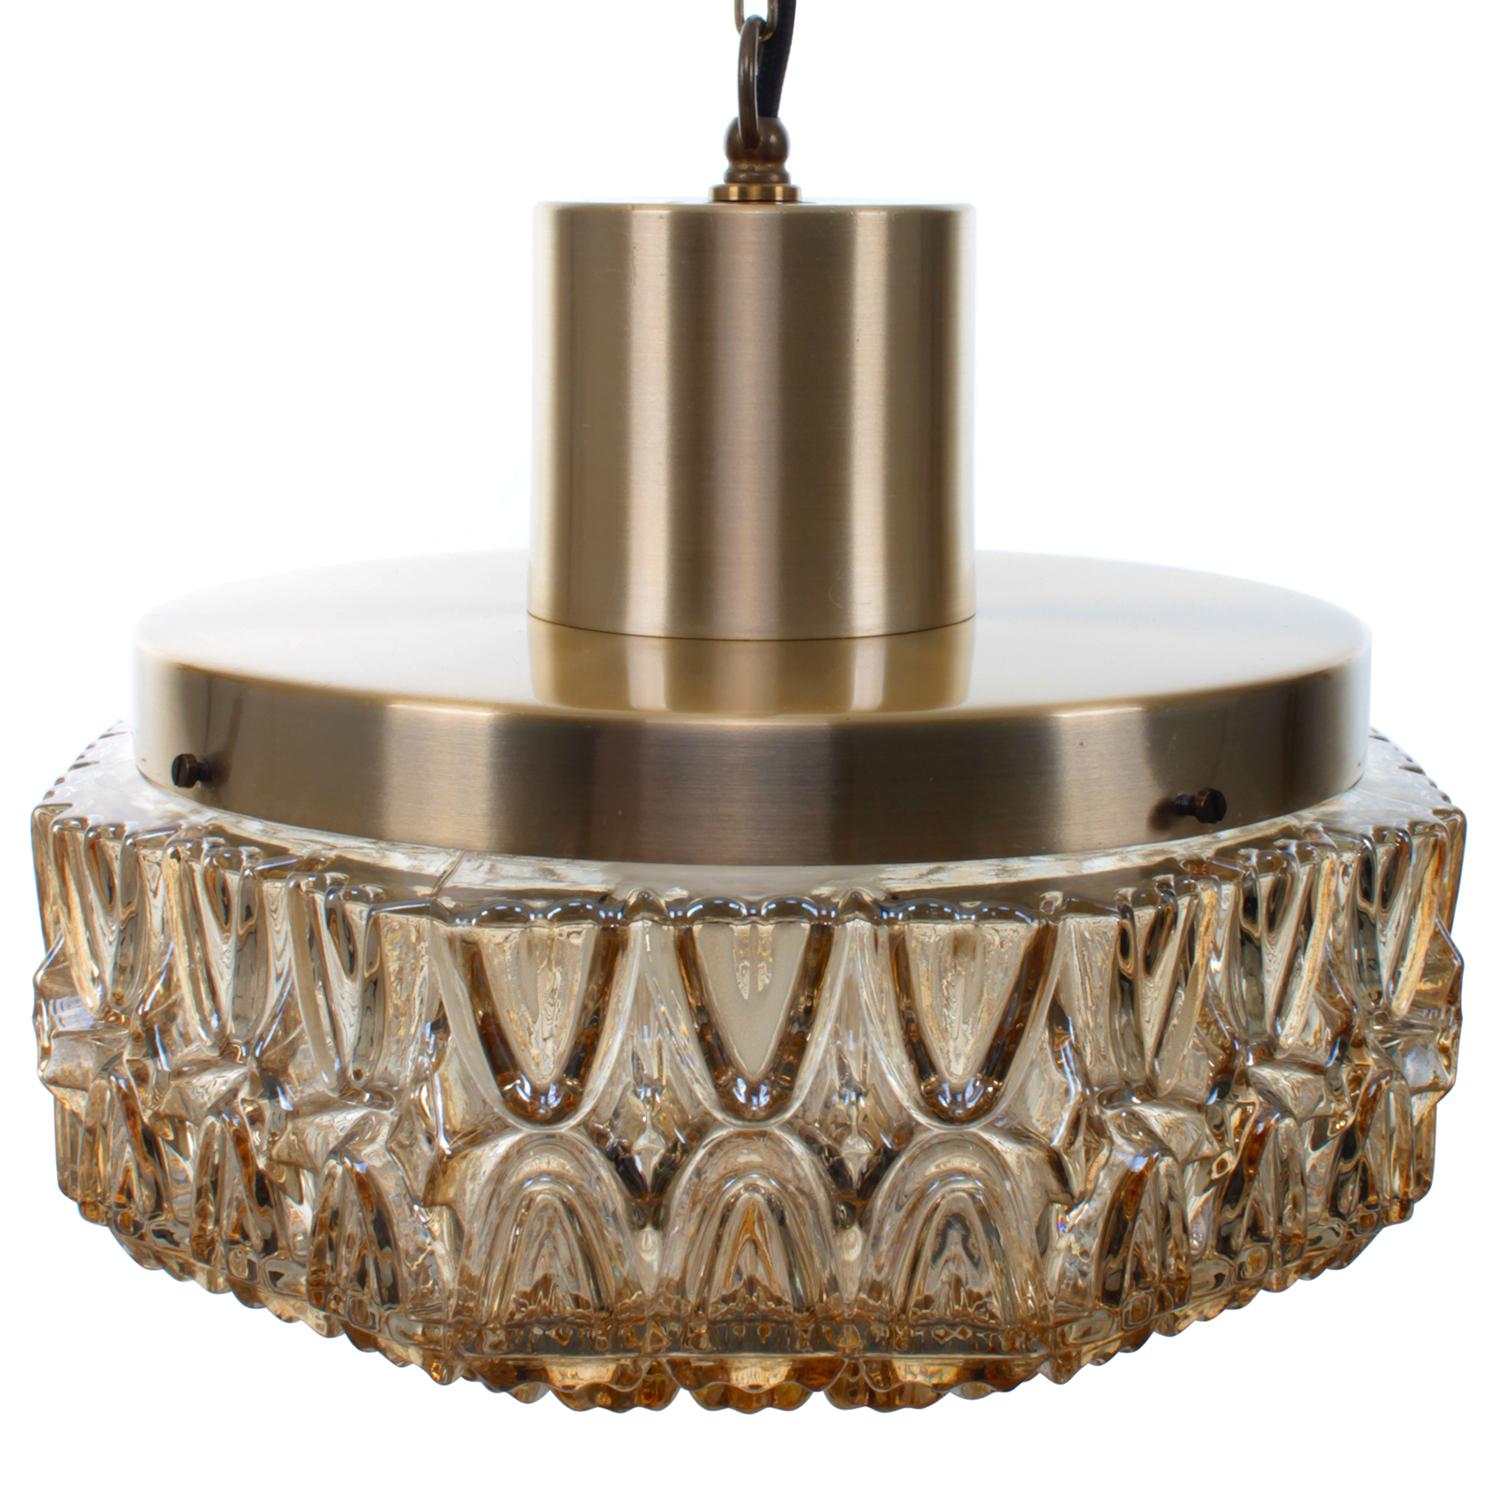 Danish Pressed Glass and Brass, Scandinavian Pendant Light from the 1960s